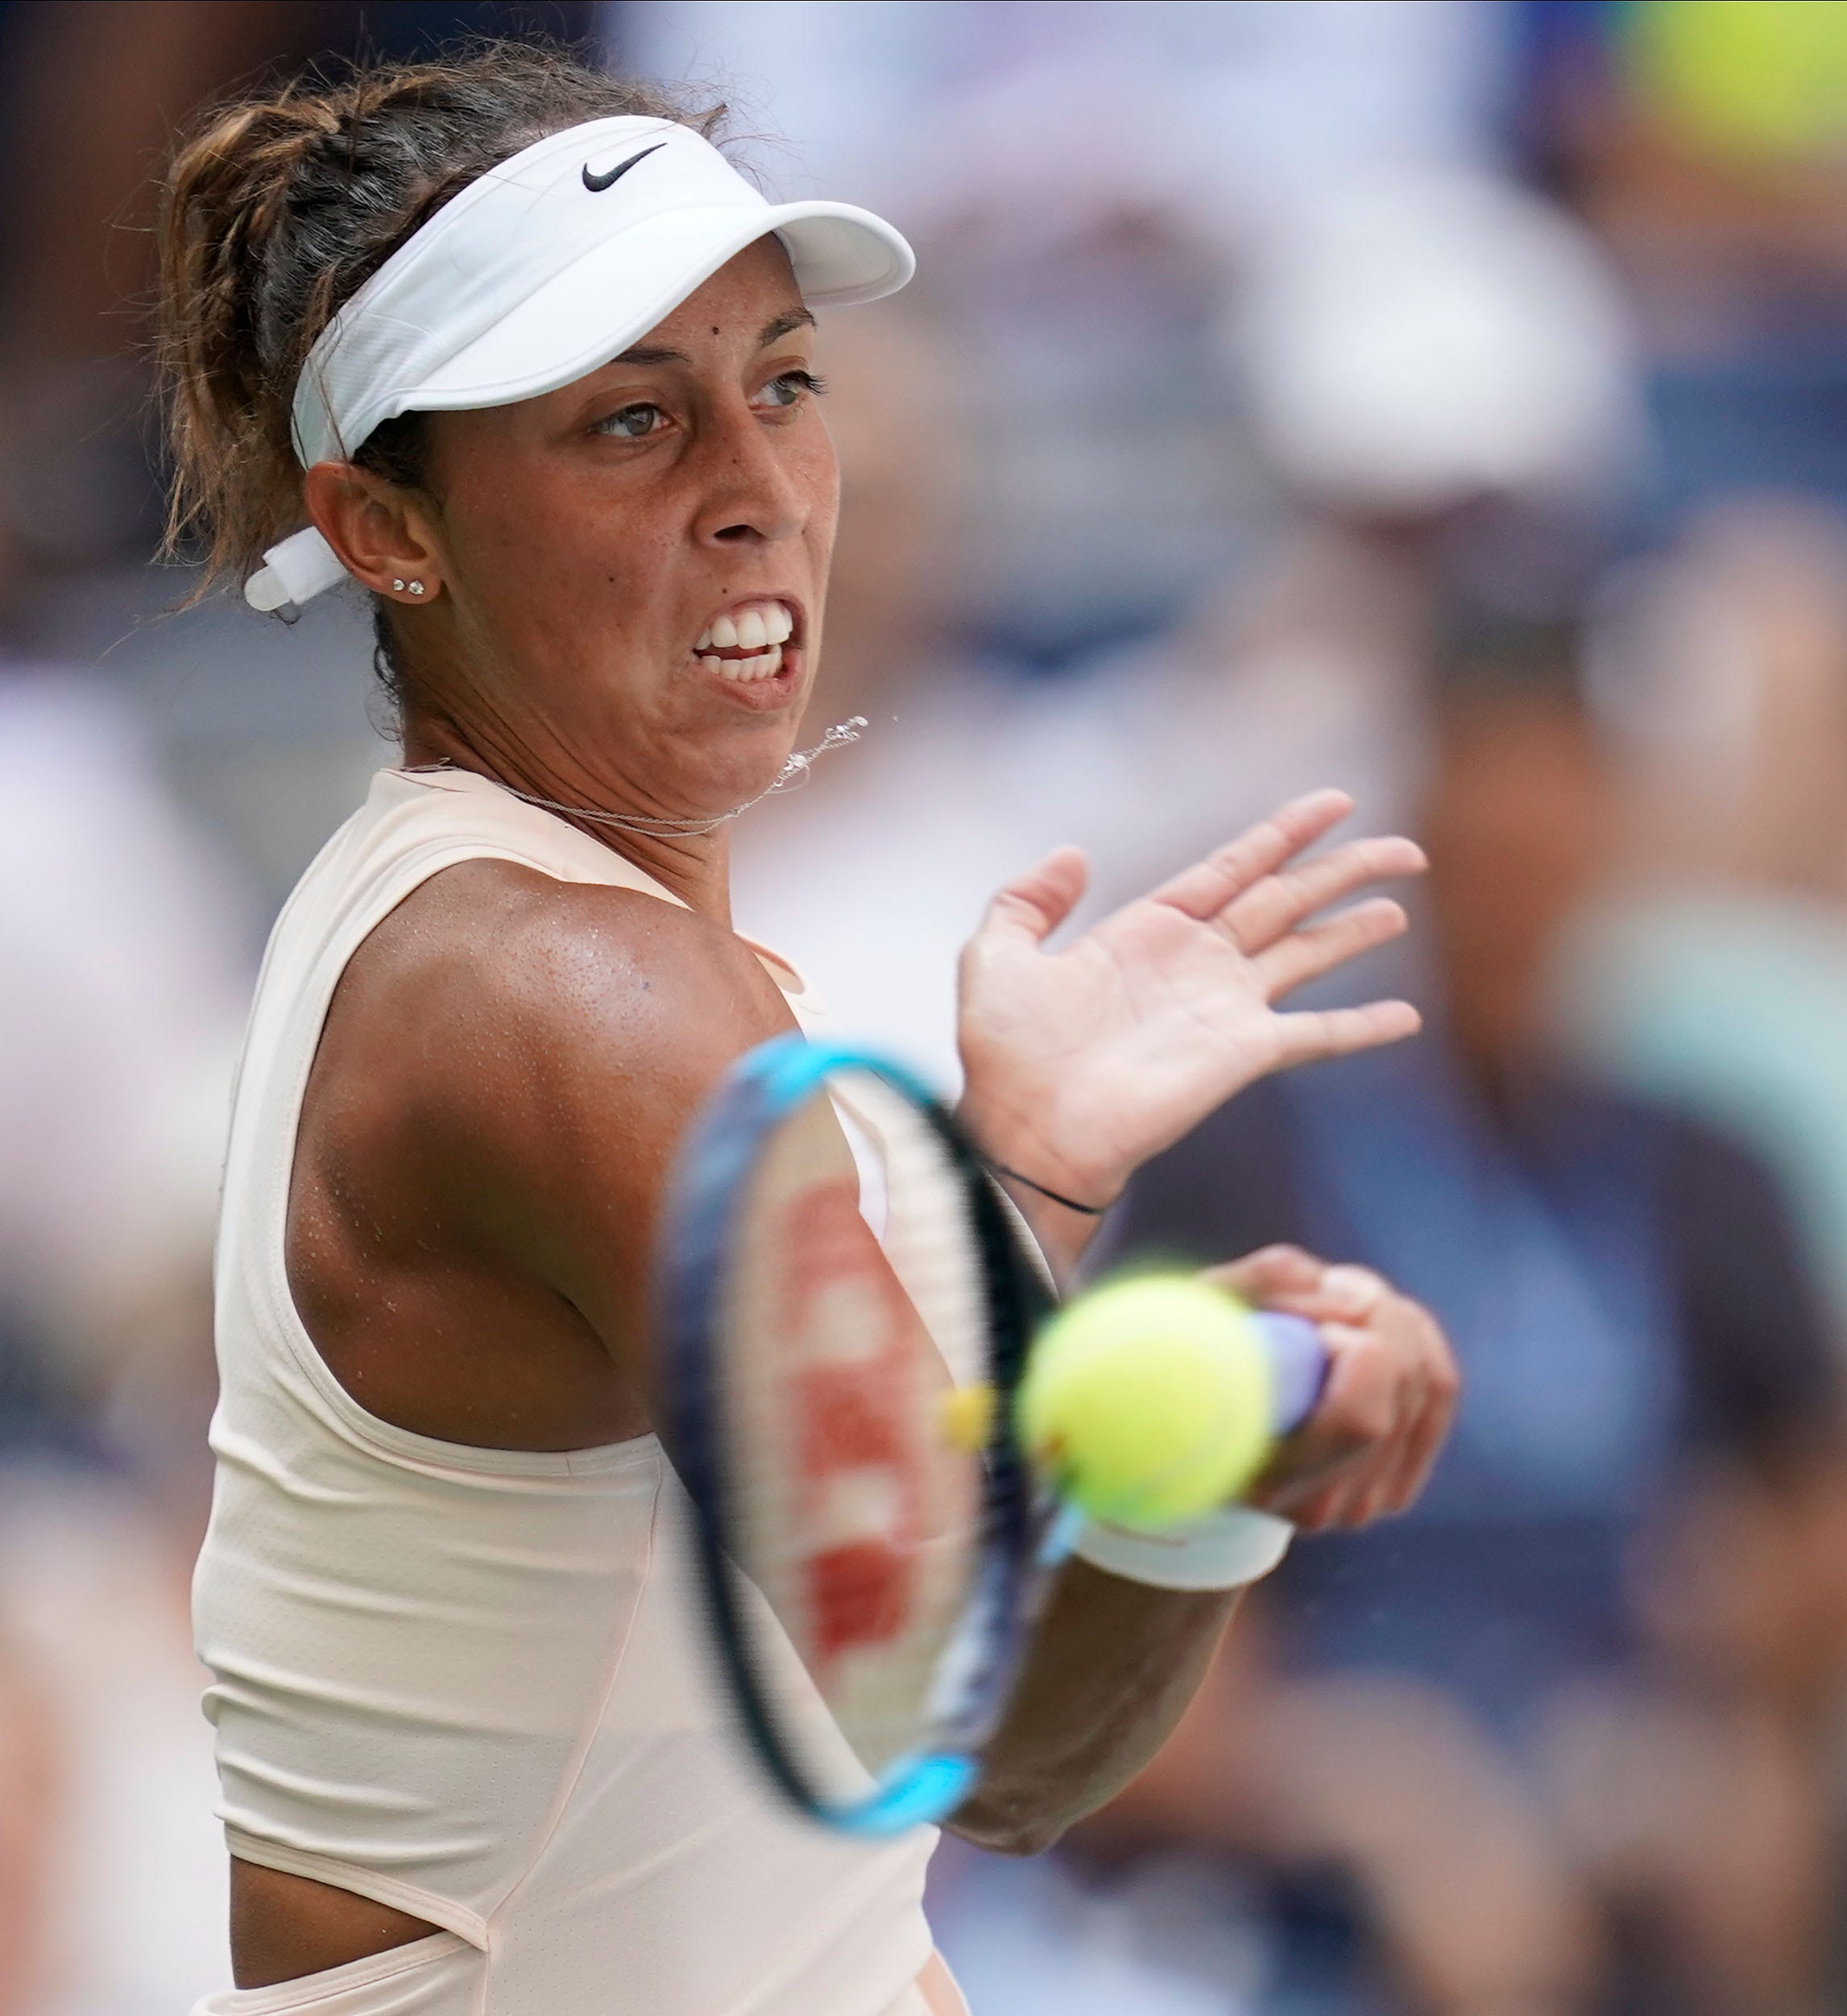 Madison Keys hits to Dominika Cibulkova of Slovakia in a fourth round match on day eight of the 2018 U.S. Open tennis tournament at USTA Billie Jean King National Tennis Center in New York.